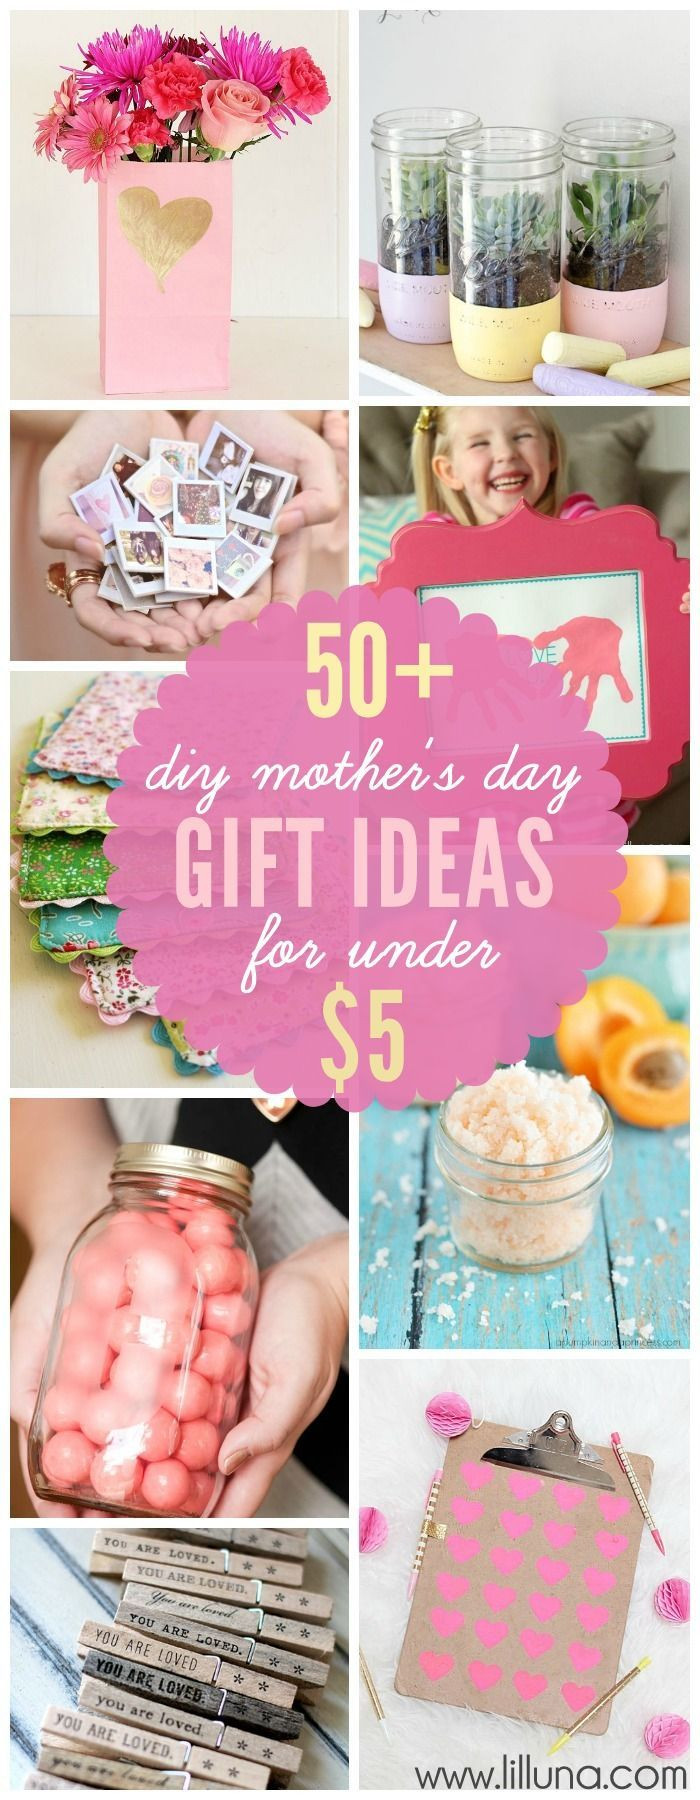 Pinterest Mothers Day Gift Ideas
 50 DIY Mother s Day Gift Ideas made for under $5